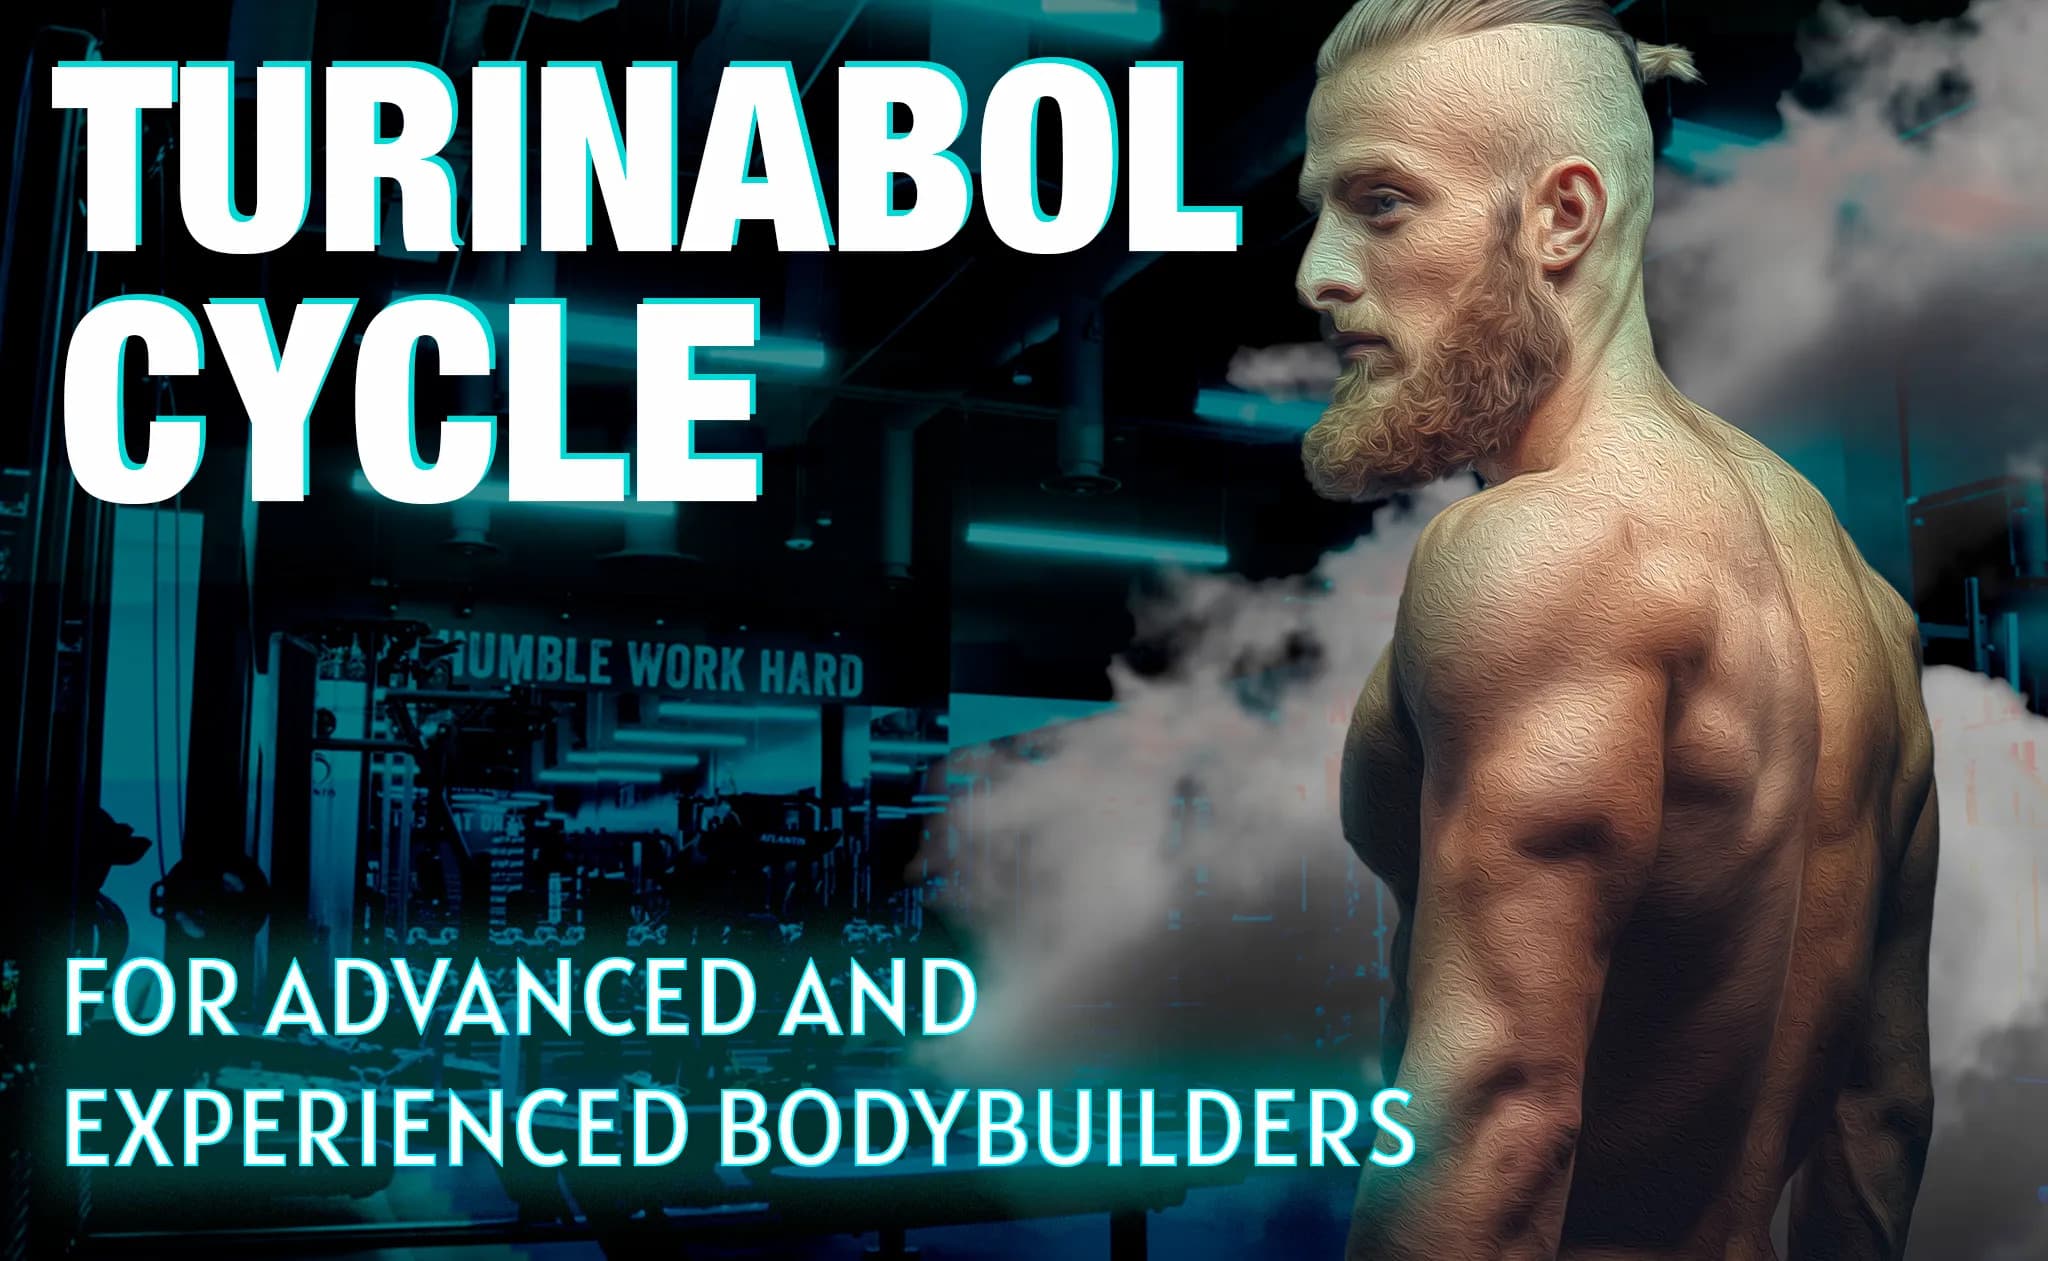 Turinabol Cycle for Beginners and Experienced Bodybuilders